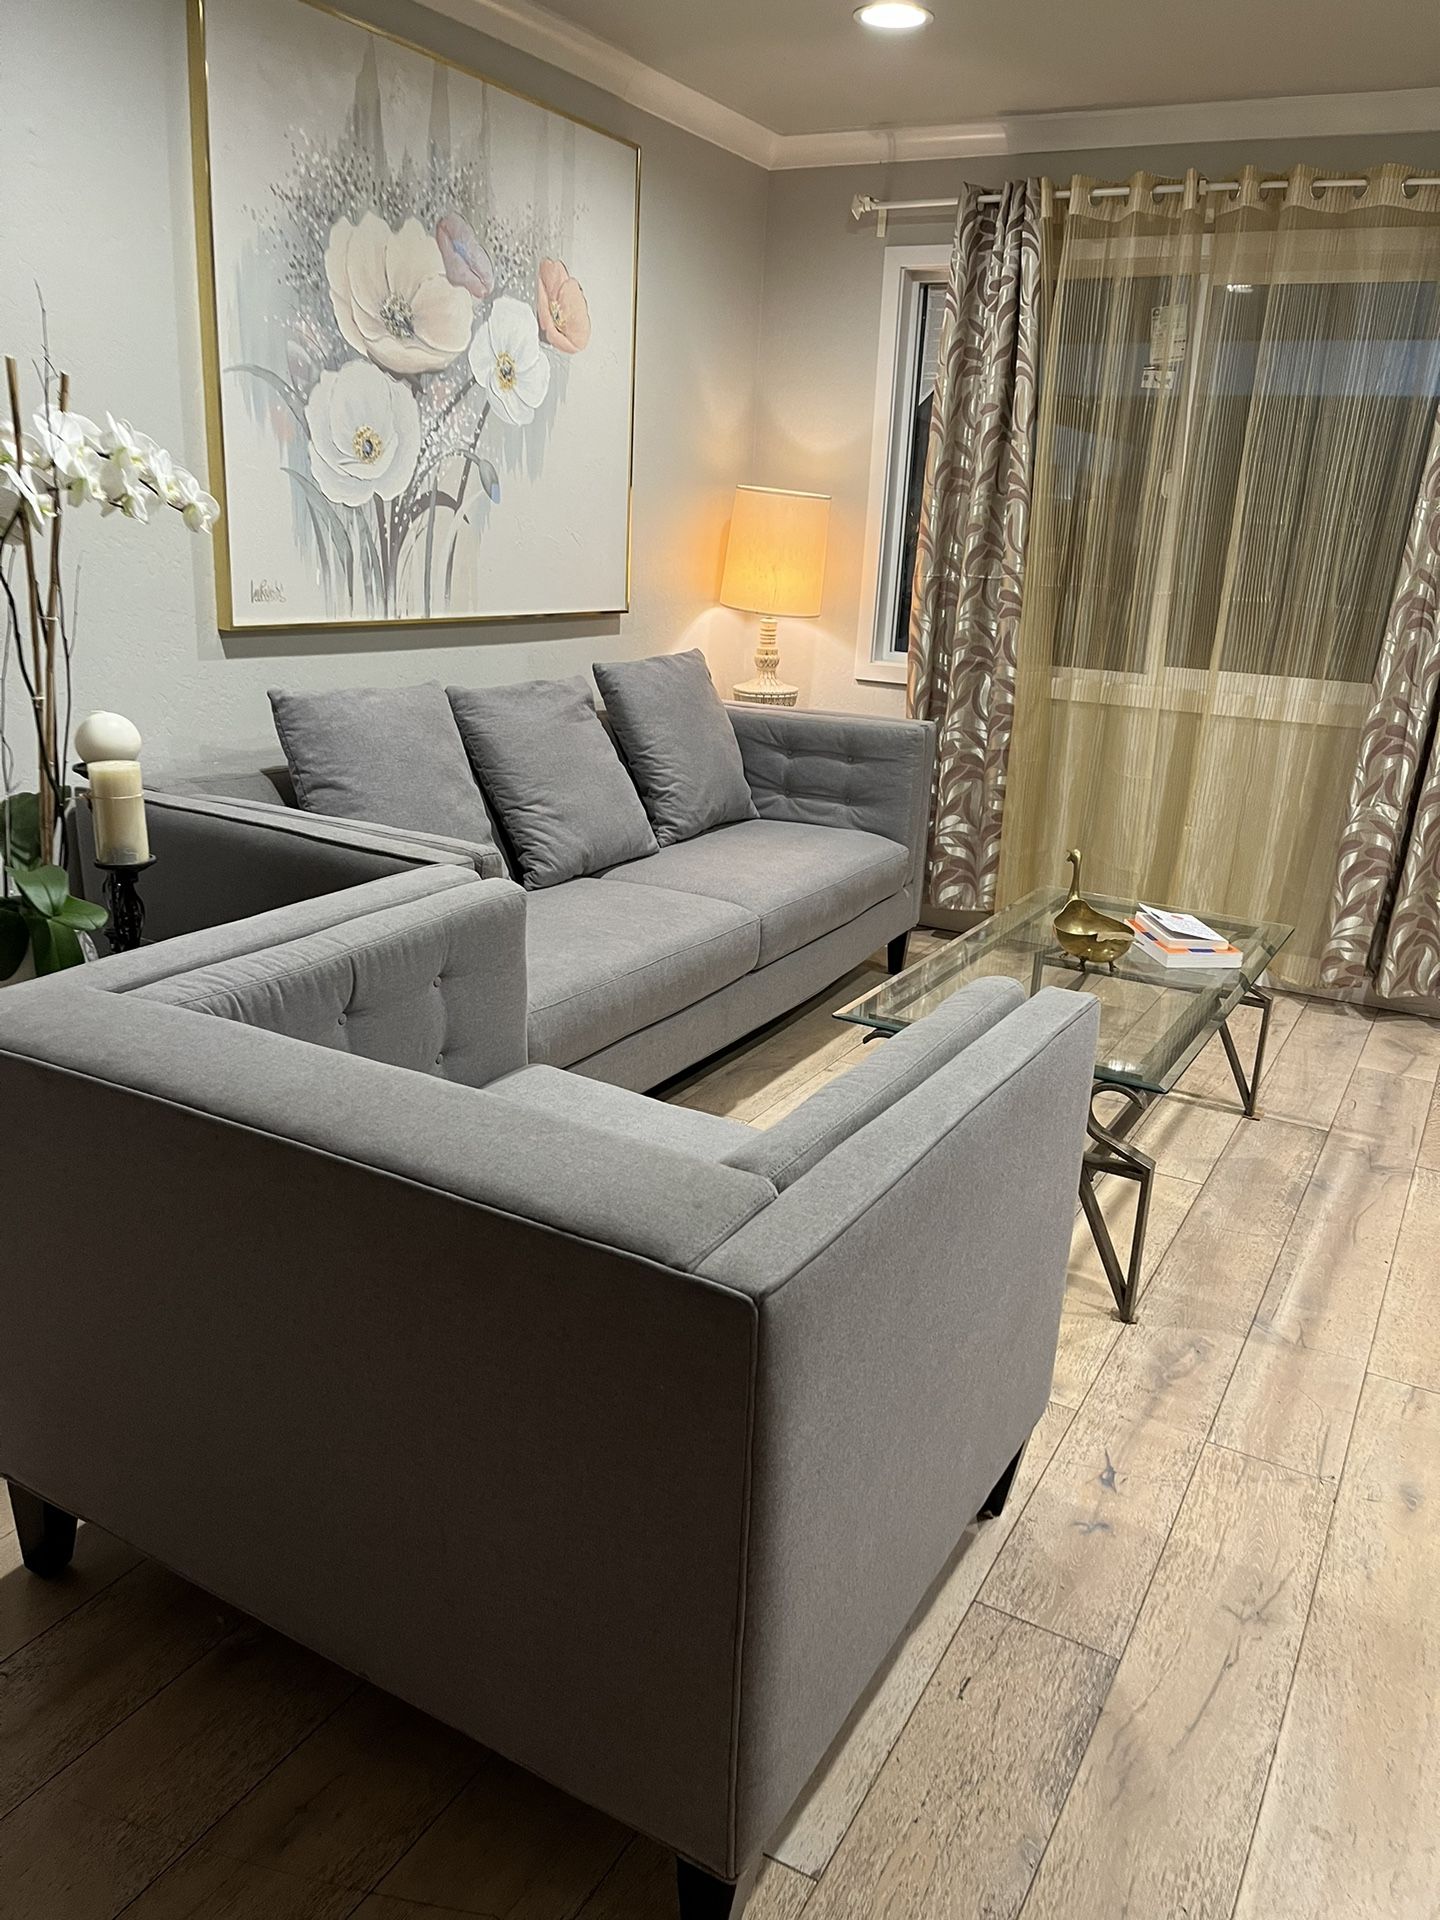 Gorgeous Modern Grey Tufted Sofa And Matching Chair